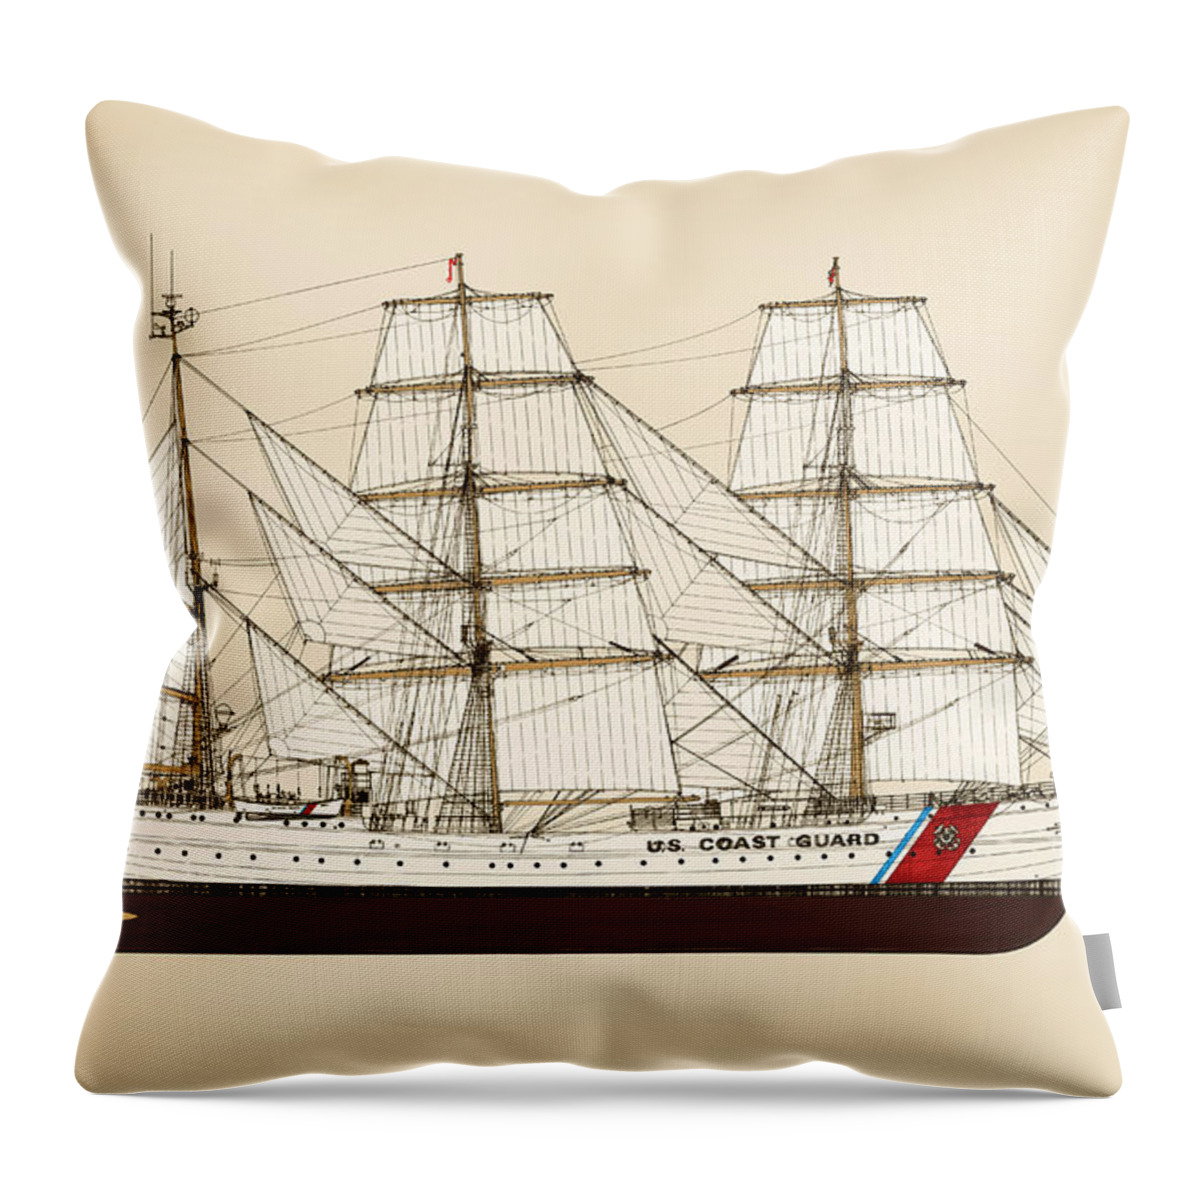 Uscg Throw Pillow featuring the drawing U. S. Coast Guard Cutter Eagle - Color by Jerry McElroy